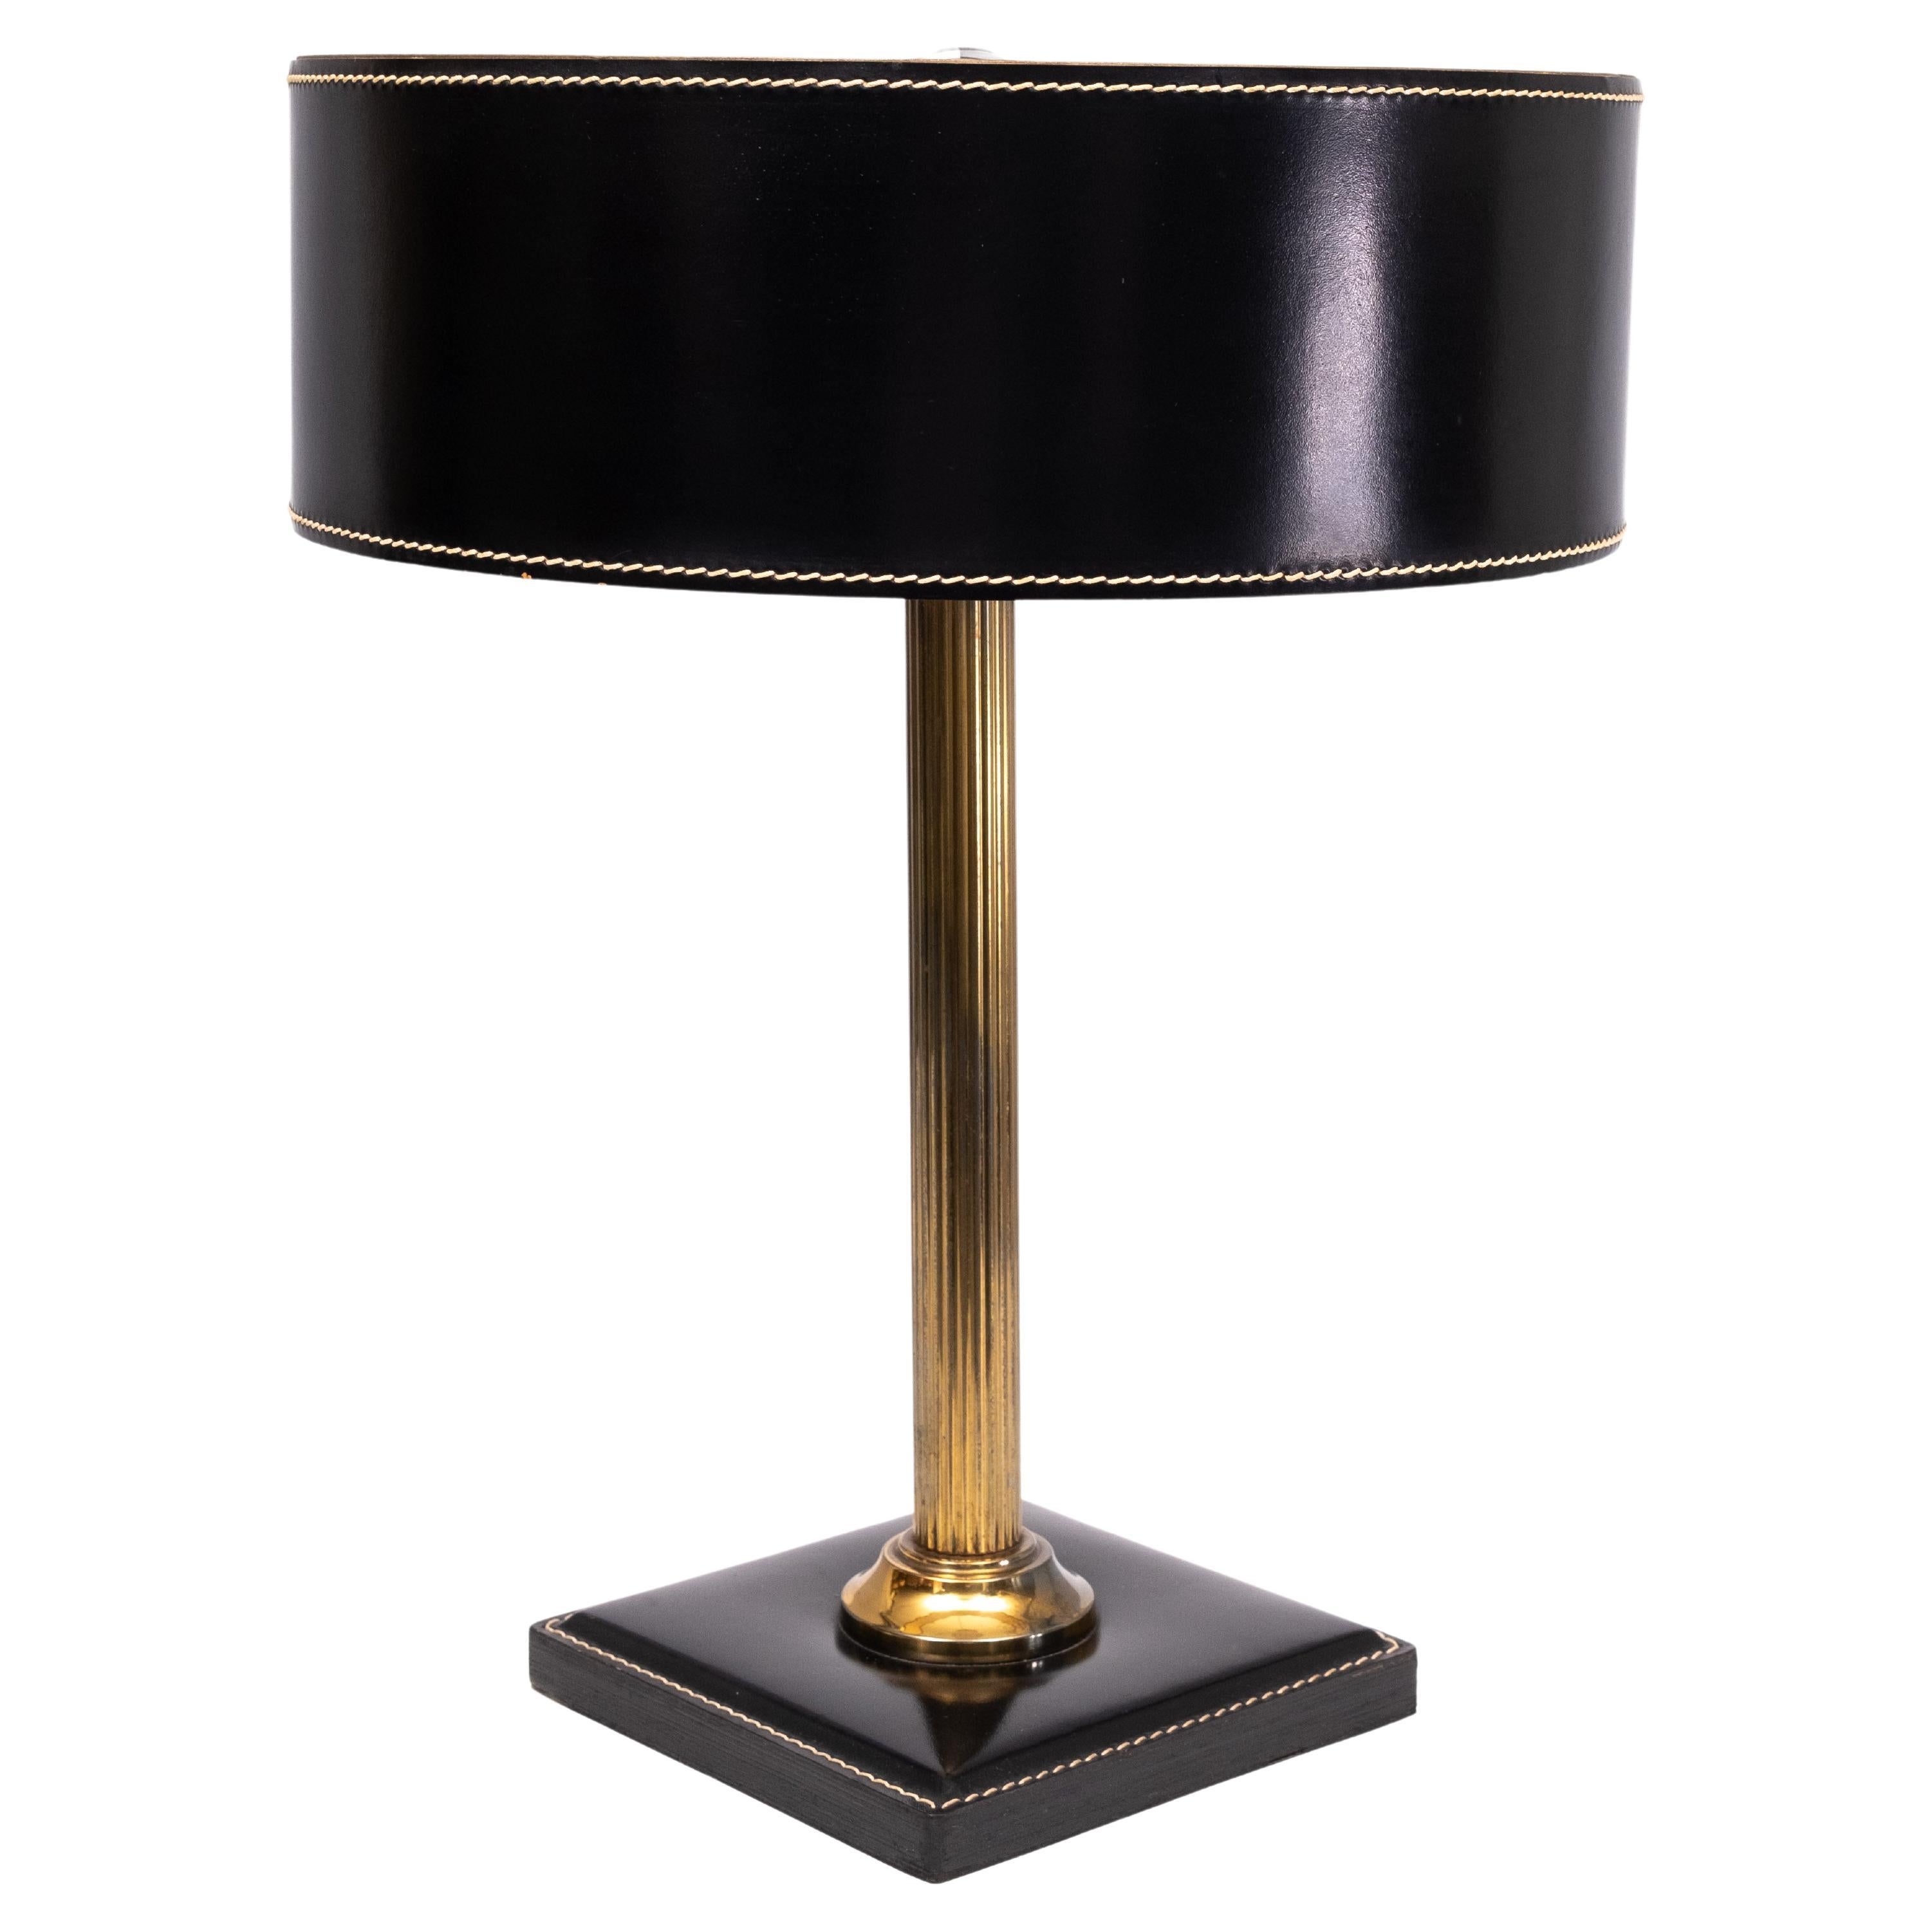 Very nice Black Stich Leather Table lamp . Brass column .
Design by Jacques  Adnet in  the 1960s .
Very good condition .Elegant and stylish table lamp  